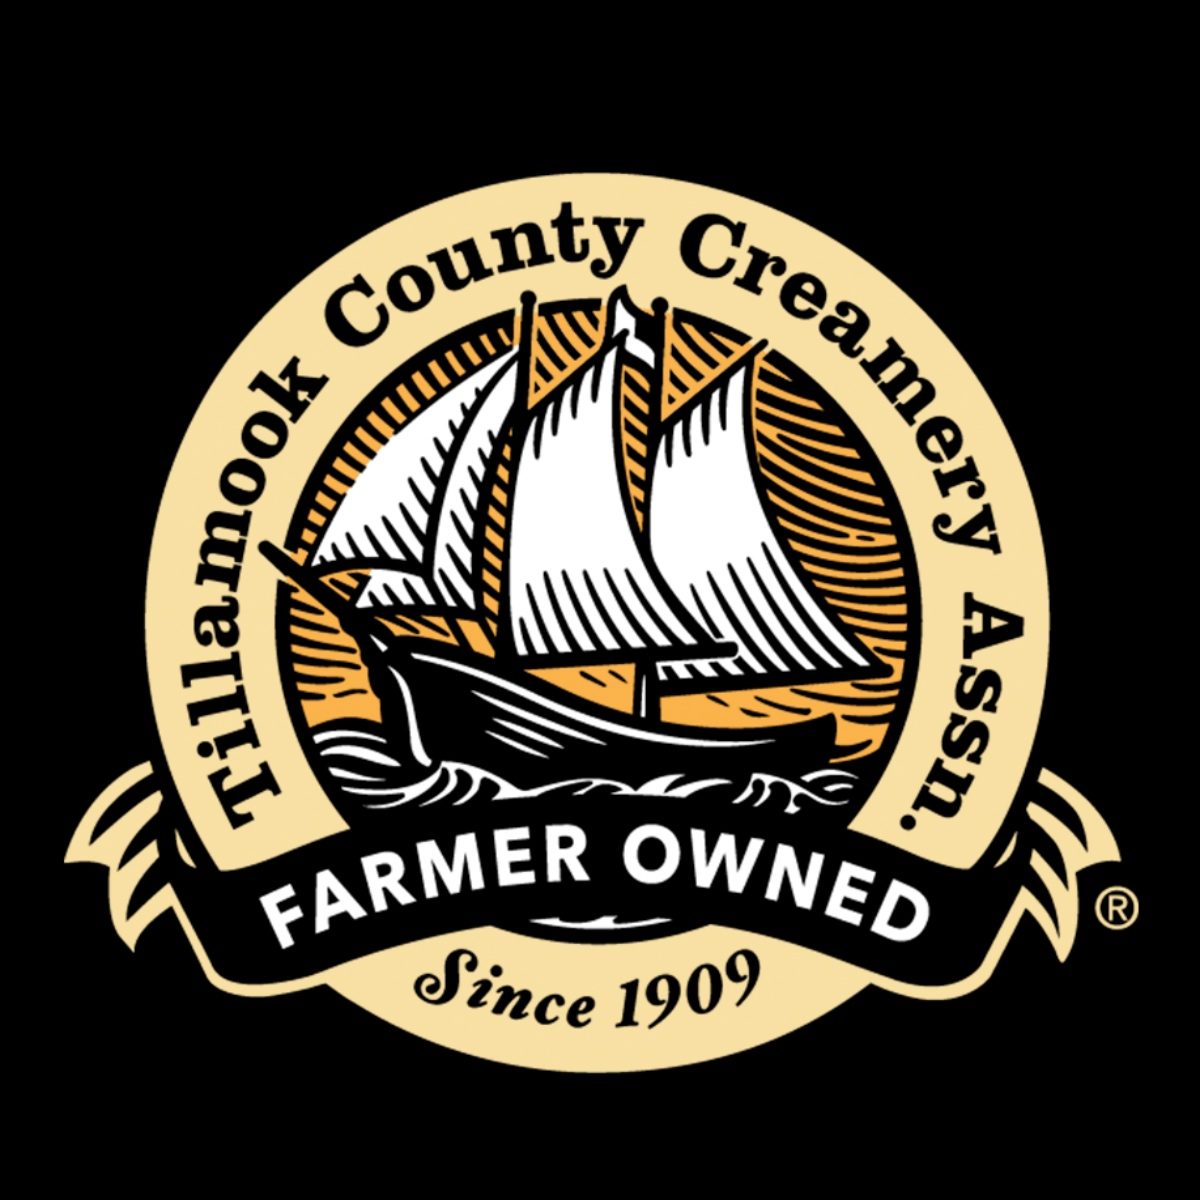 <p><strong><a class="SWhtmlLink" href="https://www.tillamook.com" rel="noopener">Tillamook County Creamery Association</a>, Tillamook</strong></p> <p>This farmer-owned dairy co-op does more than just milk cows—they're famous for making cheese, ice cream, butter and yogurt. If you visit the Oregon factory, you can tour the facility and watch the cheese being made!</p>